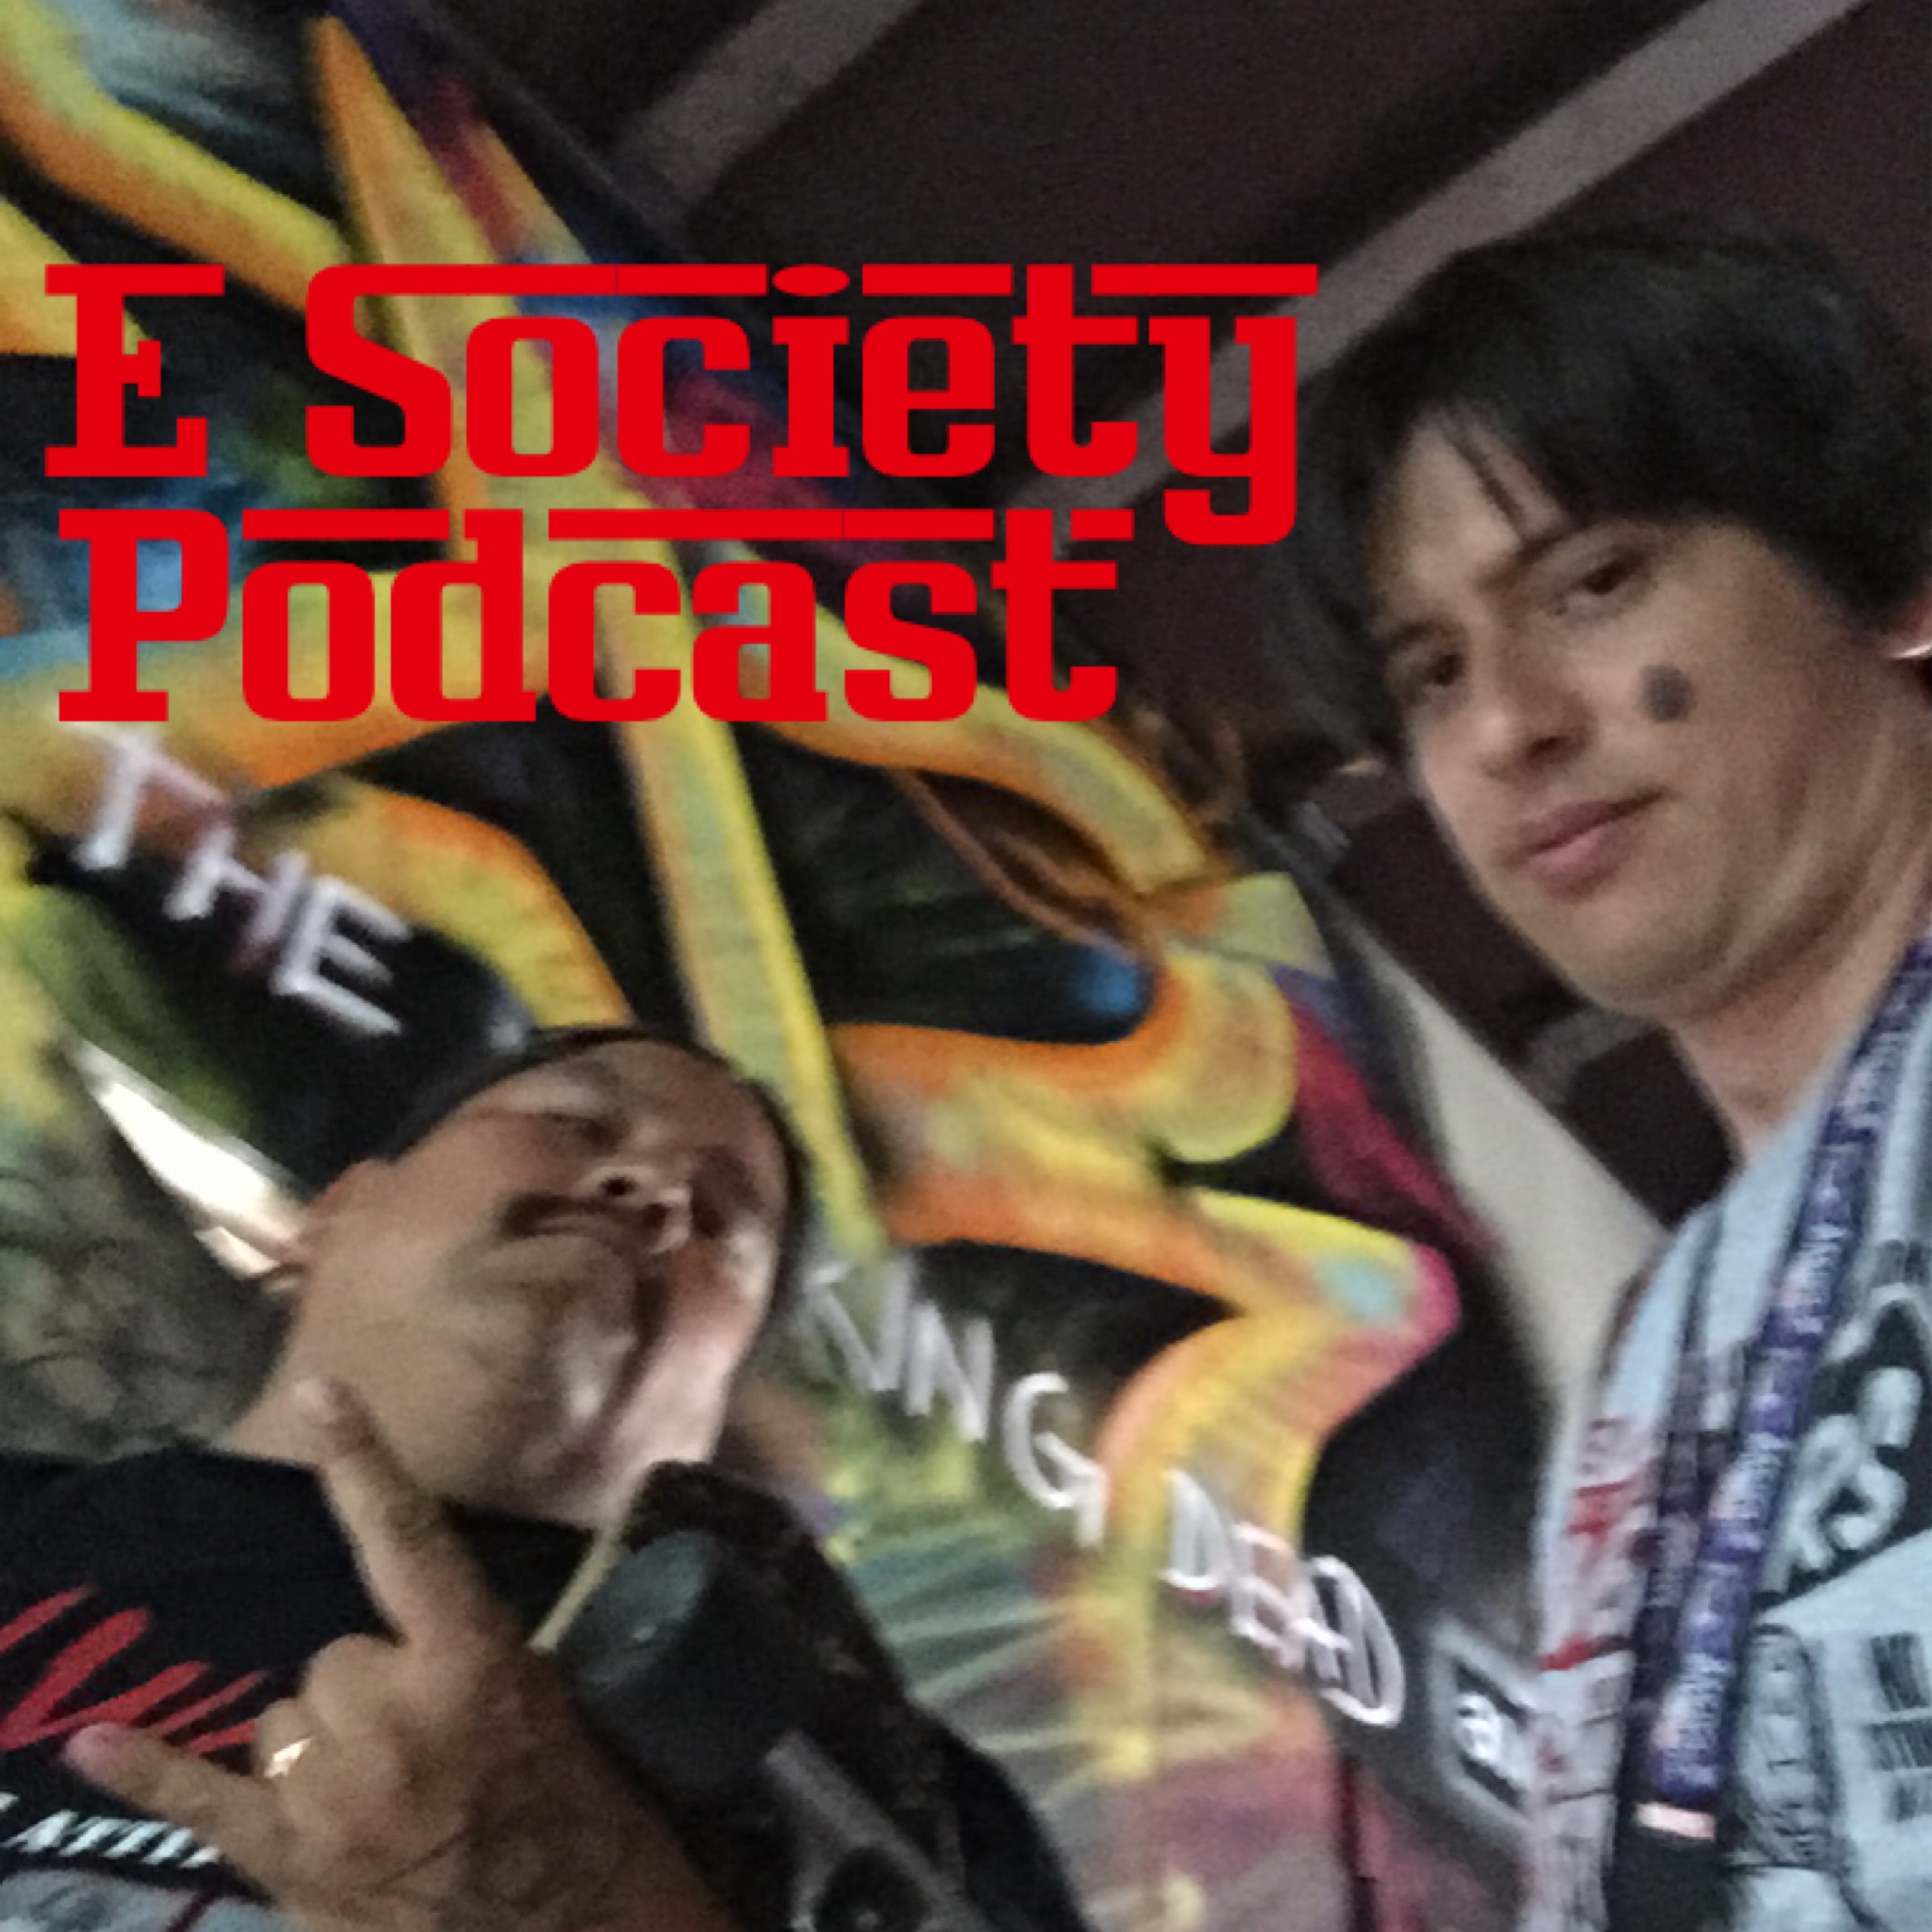 E Society Podcast - Ep. 80: The countdown to the Last Jedi continues and other junk.